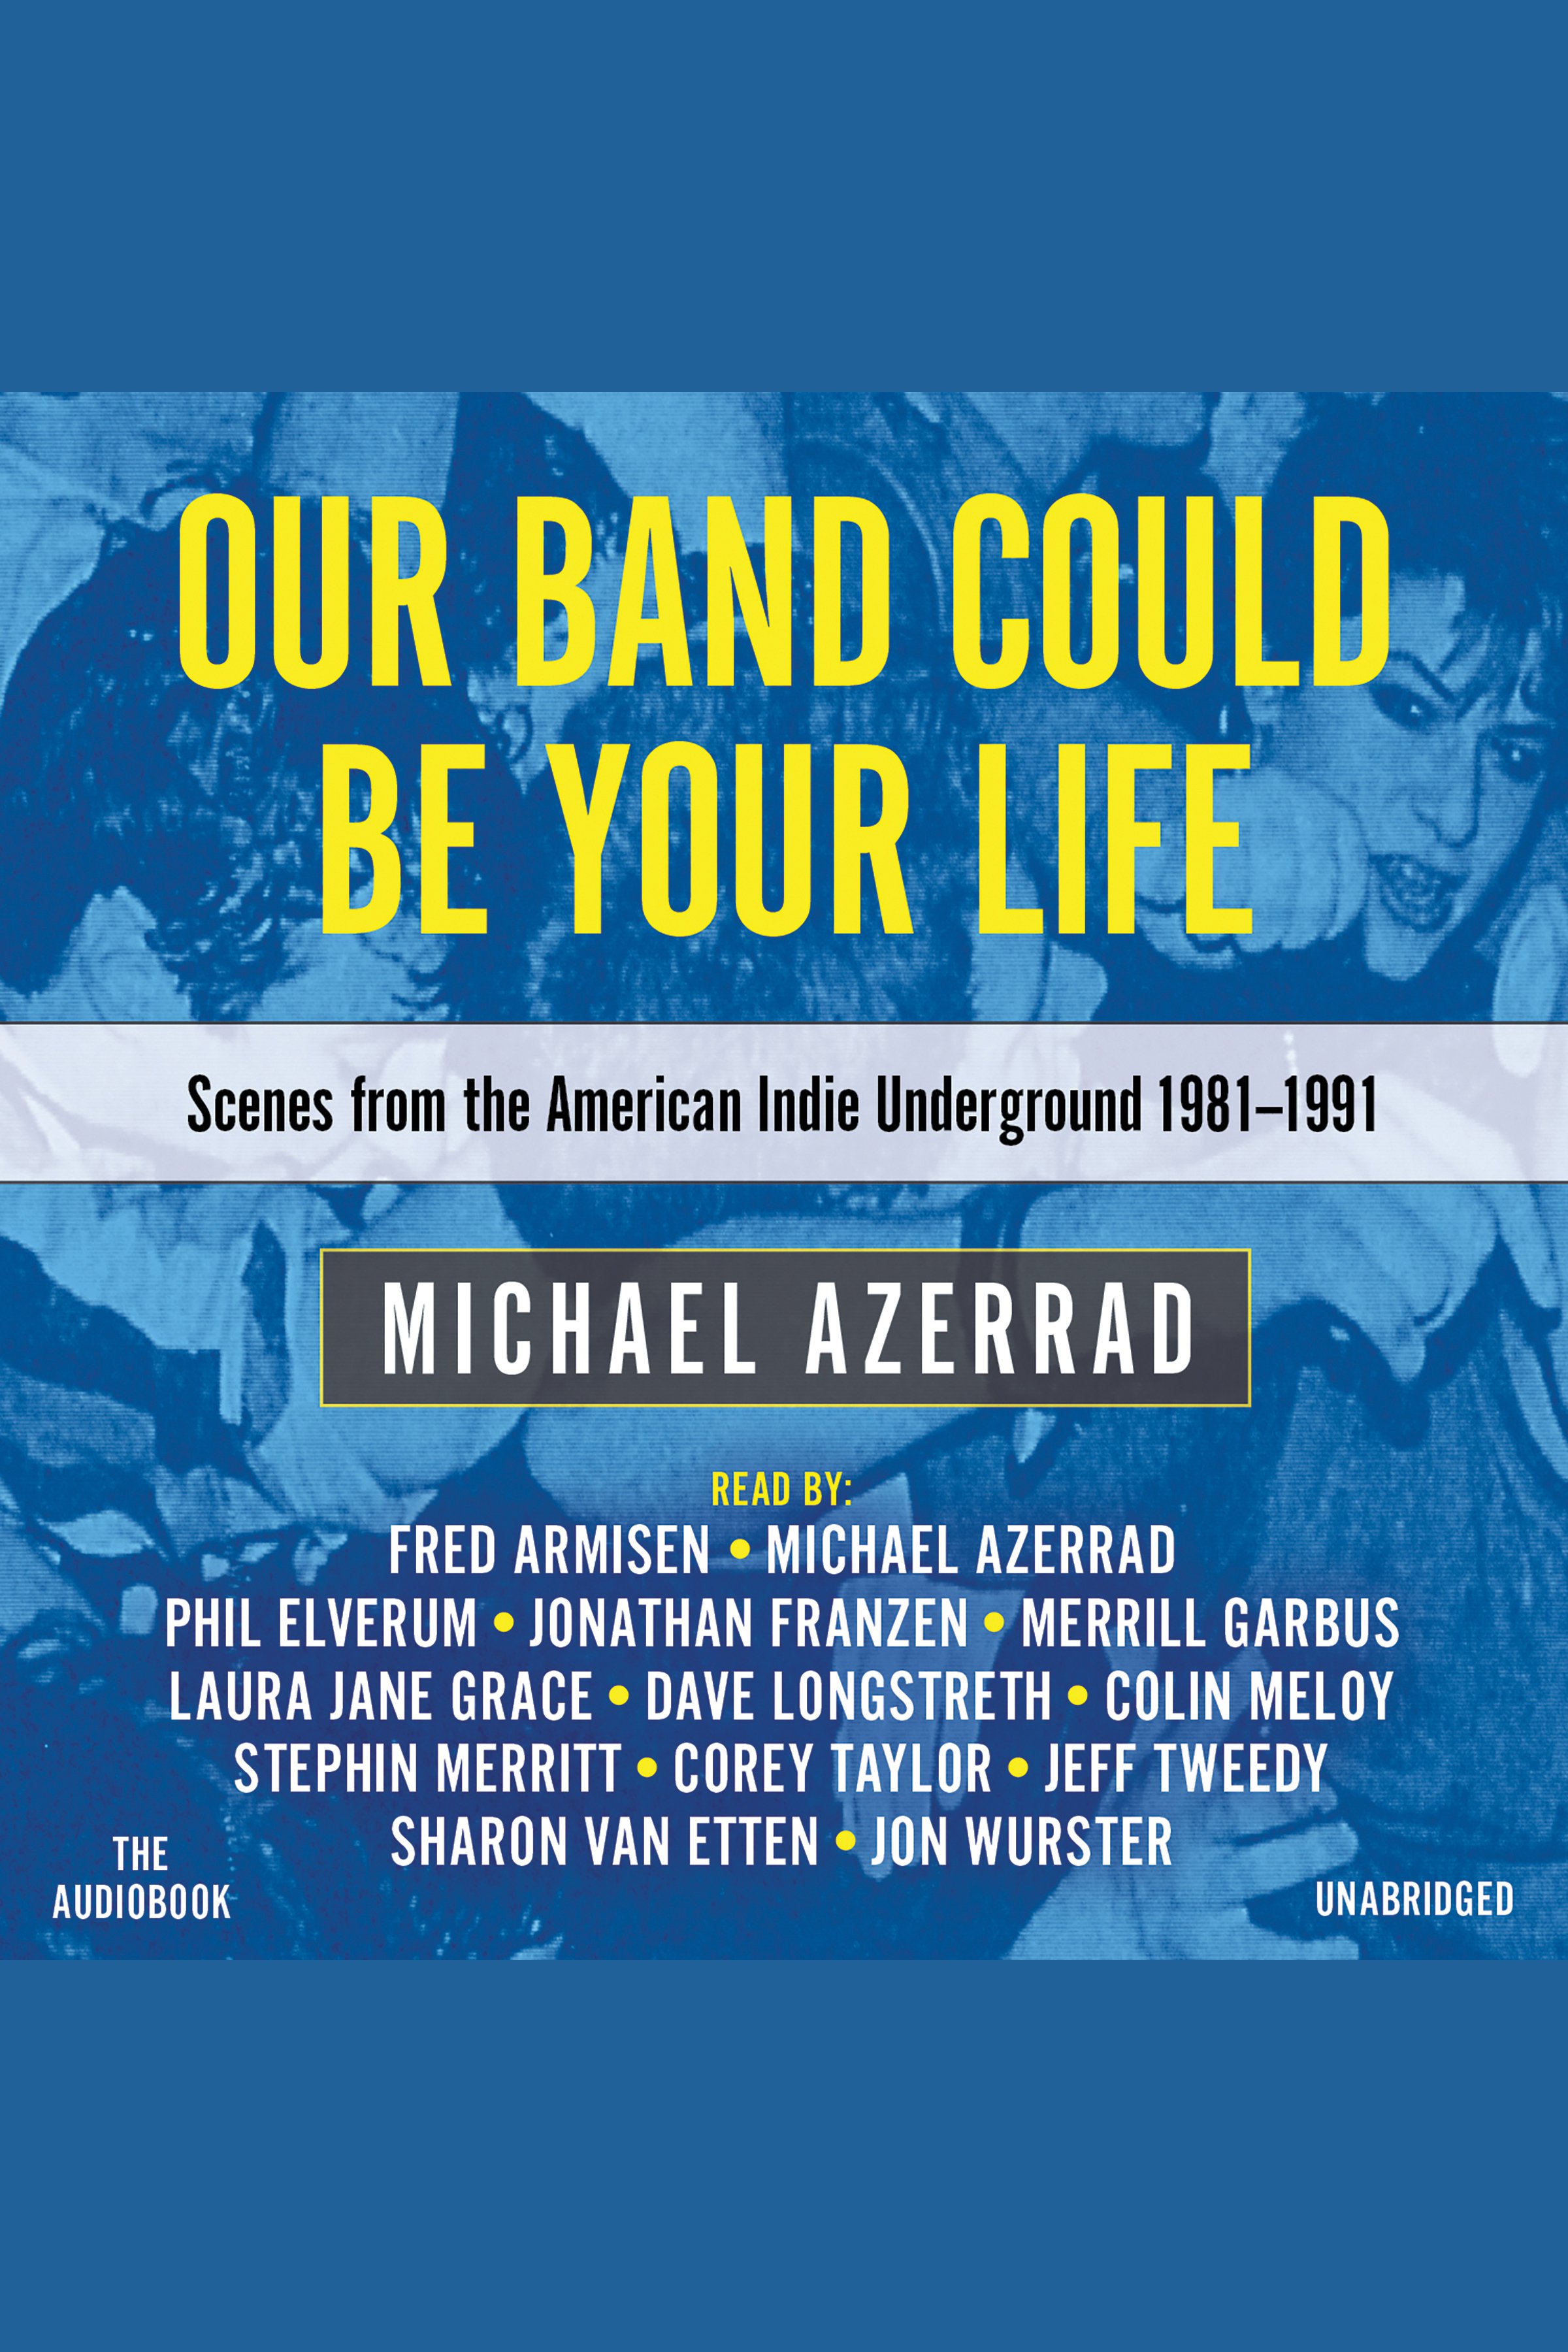 Our Band Could Be Your Life Scenes from the American Indie Underground, 1981-1991 cover image